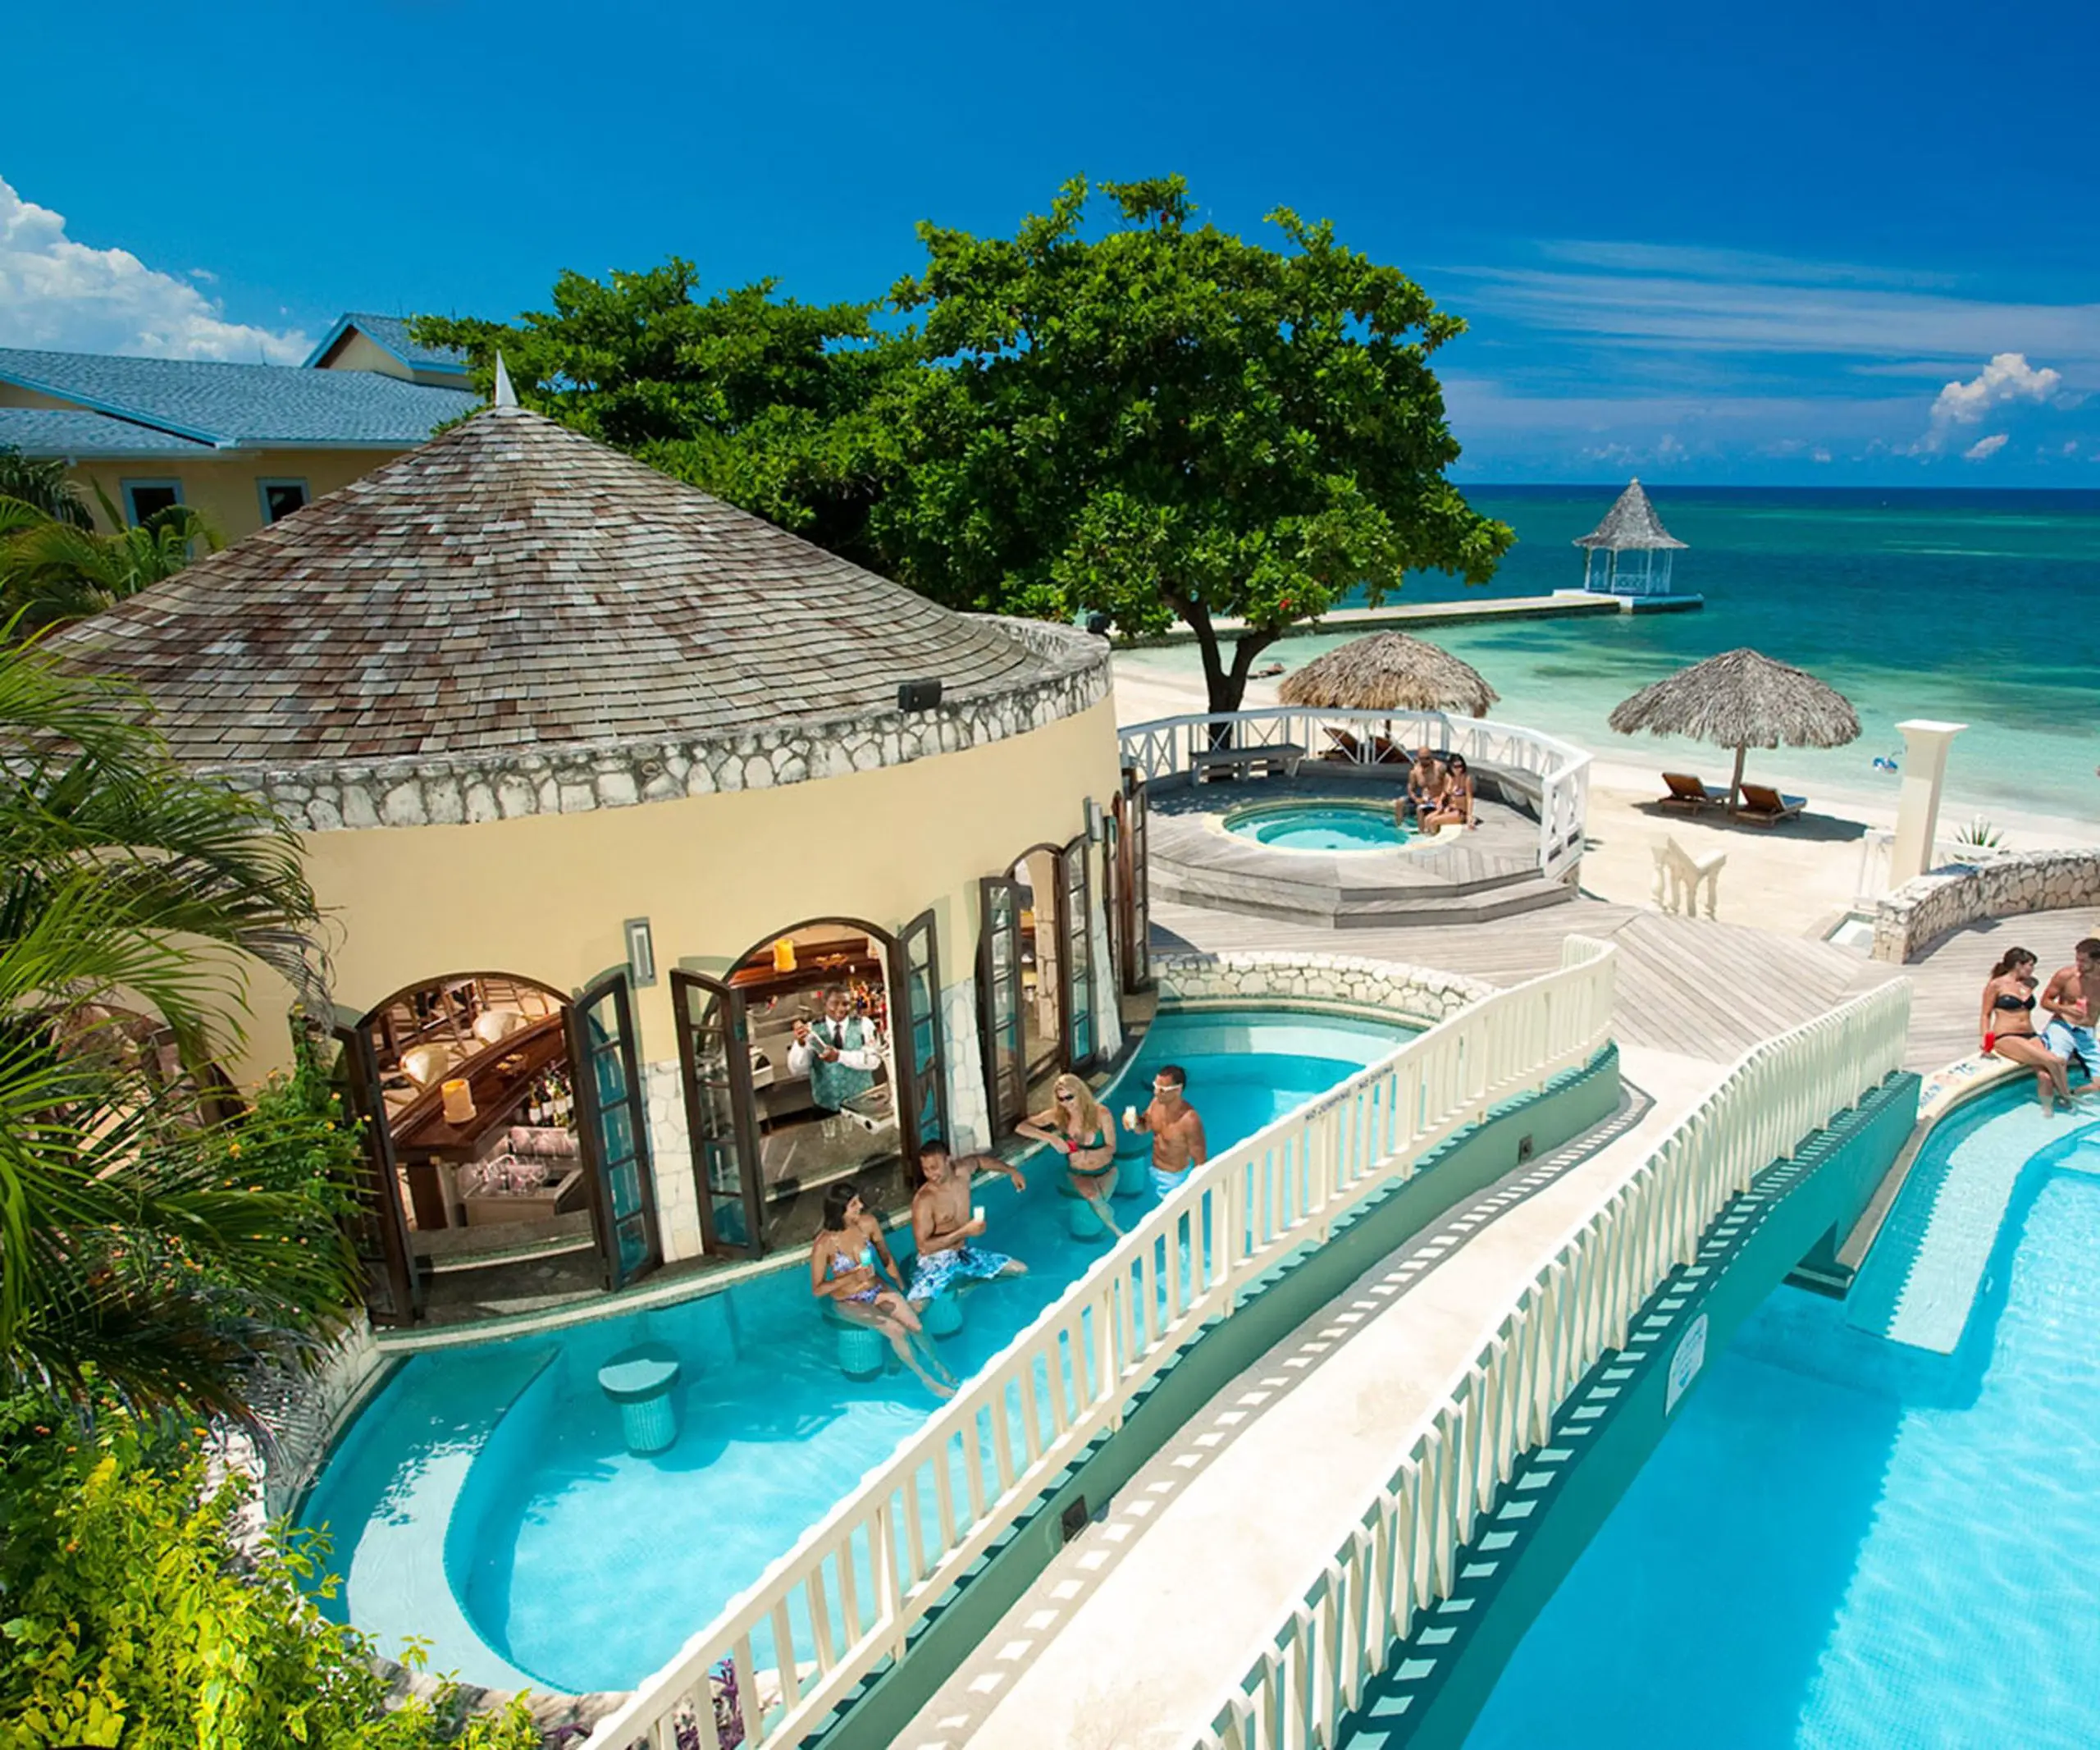 Sandals Montego Bay #Jamaica! A couples only resort made for romance ...